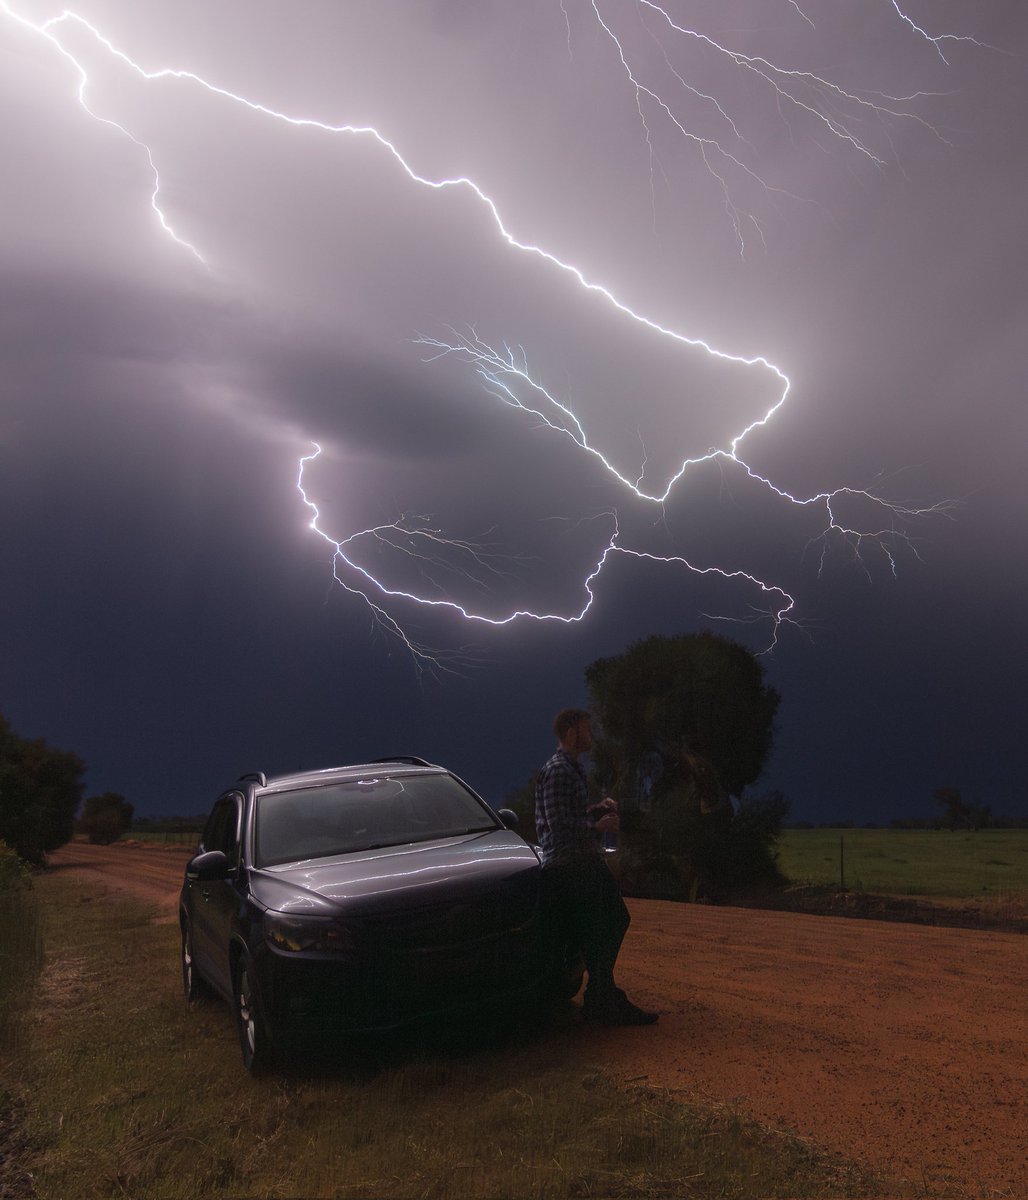 Standing about considering the long drive home, blissfully unaware that the sky was about to explode overhead 💥 ⚡

Taken way back in 2018 somewhere north of Perth and re-edited recently with LRs newish denoise function.
#wxtwitter #StormHour #waweather #perthweather